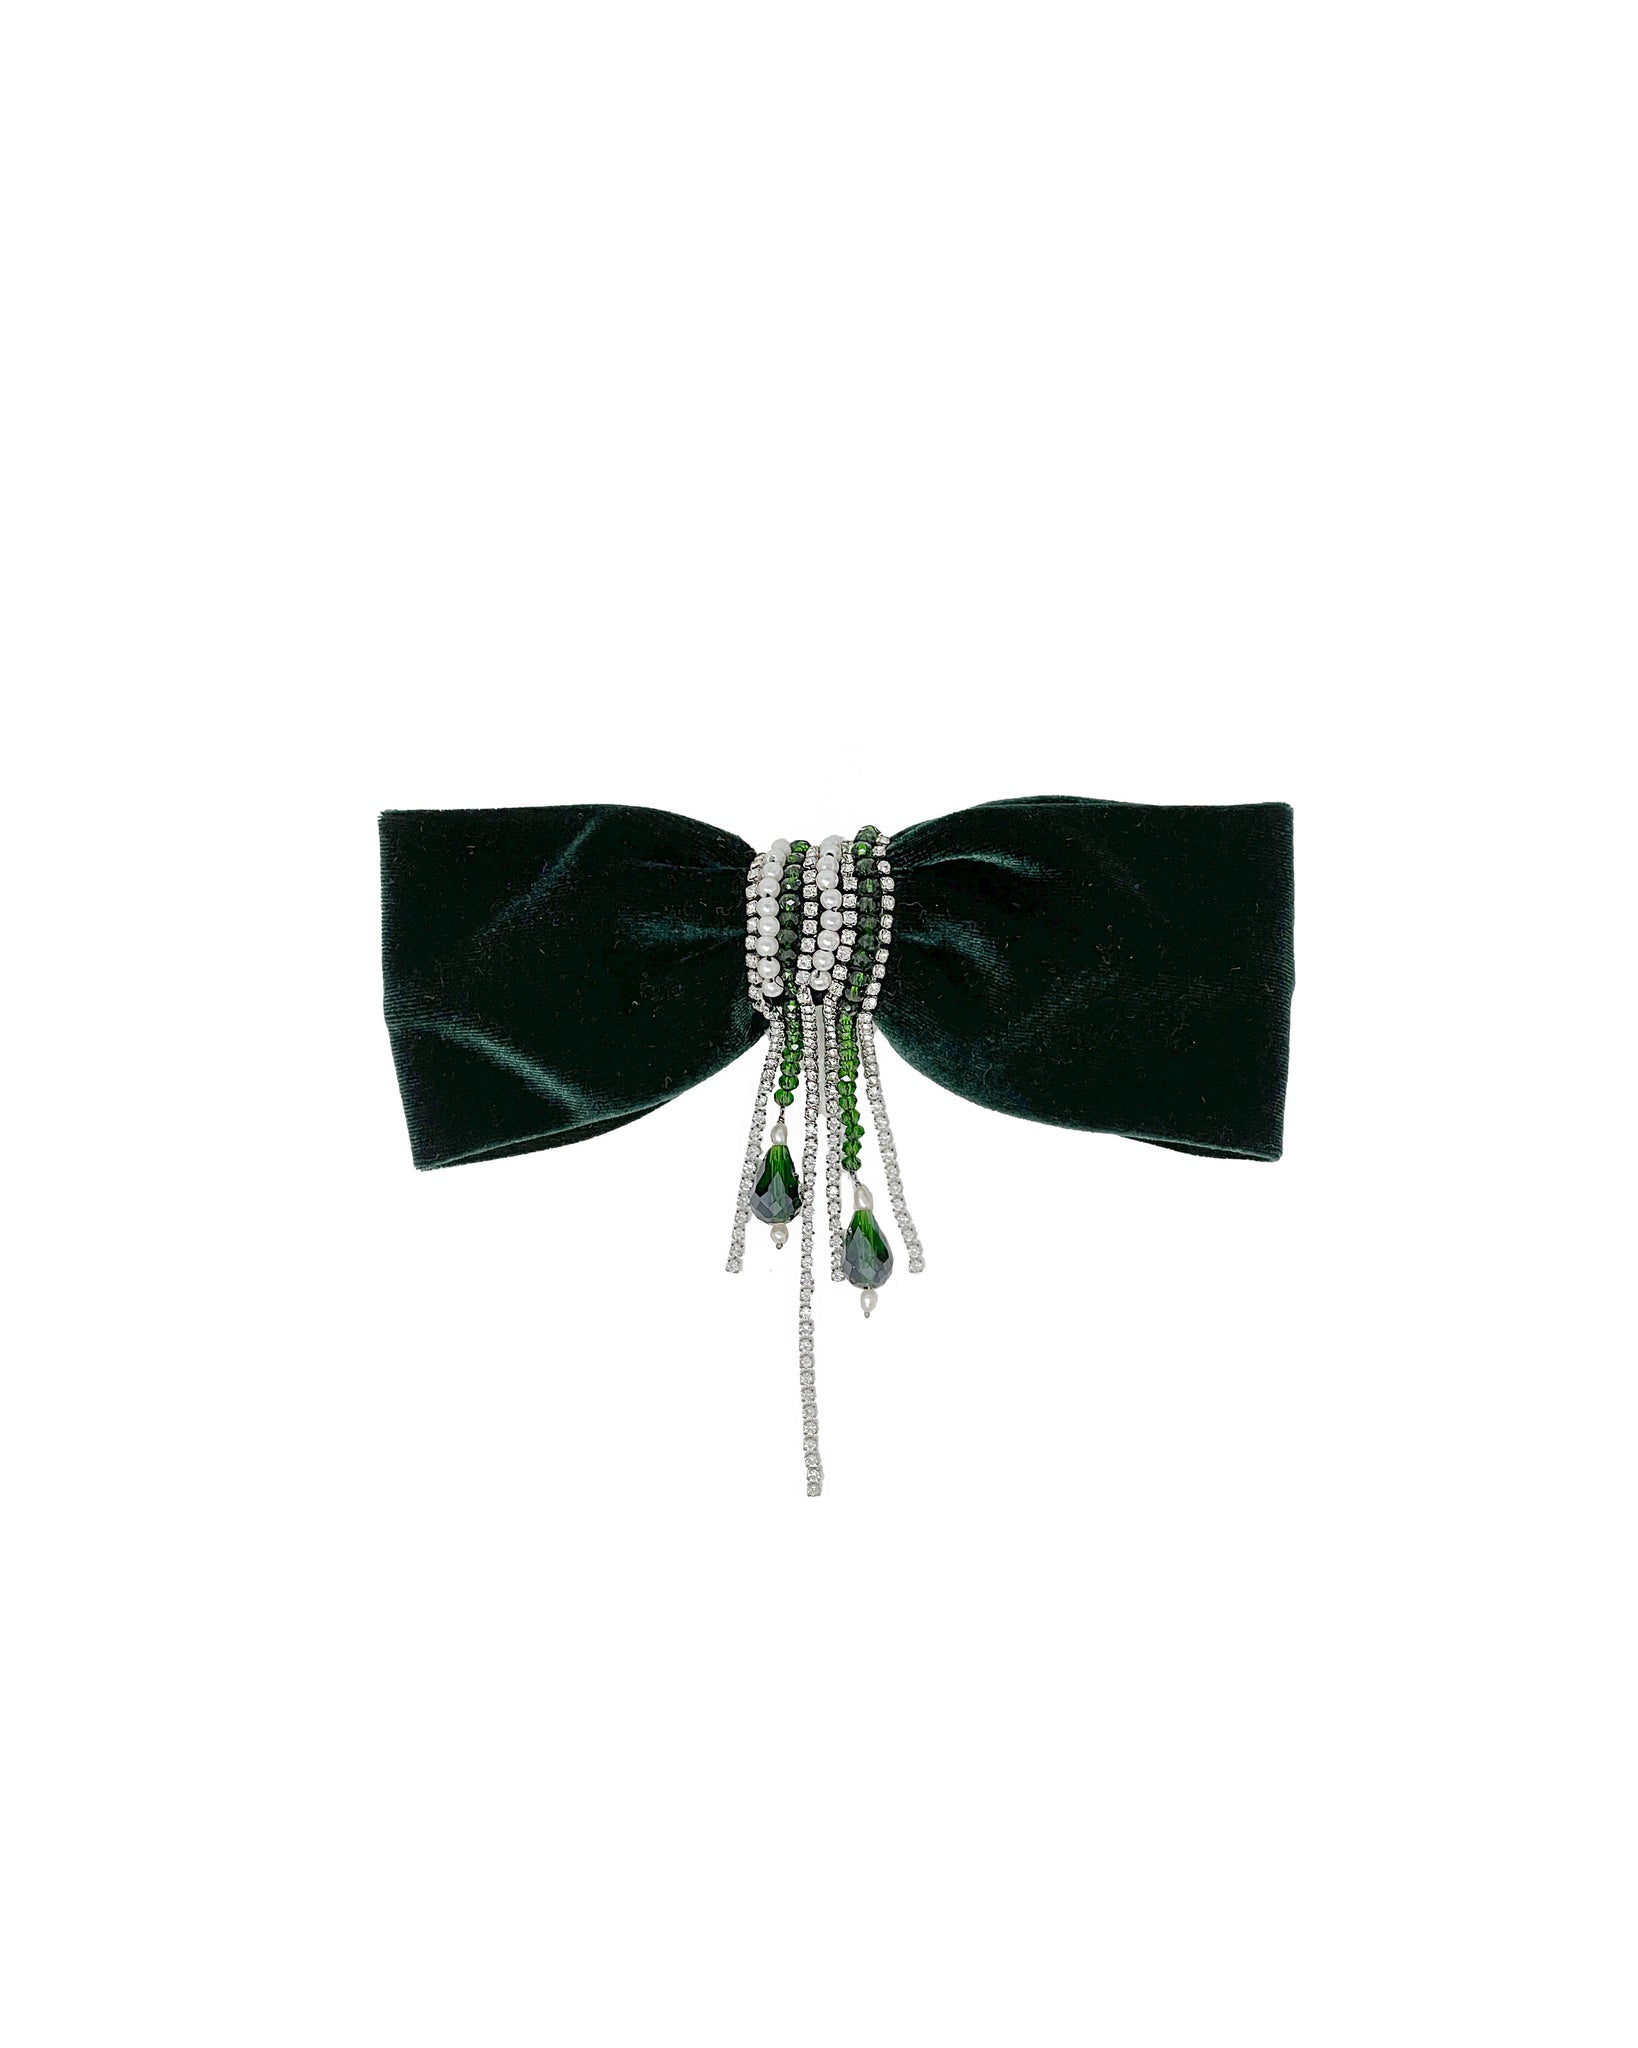 Embroidered dark green velvet bow barrette with central crystals